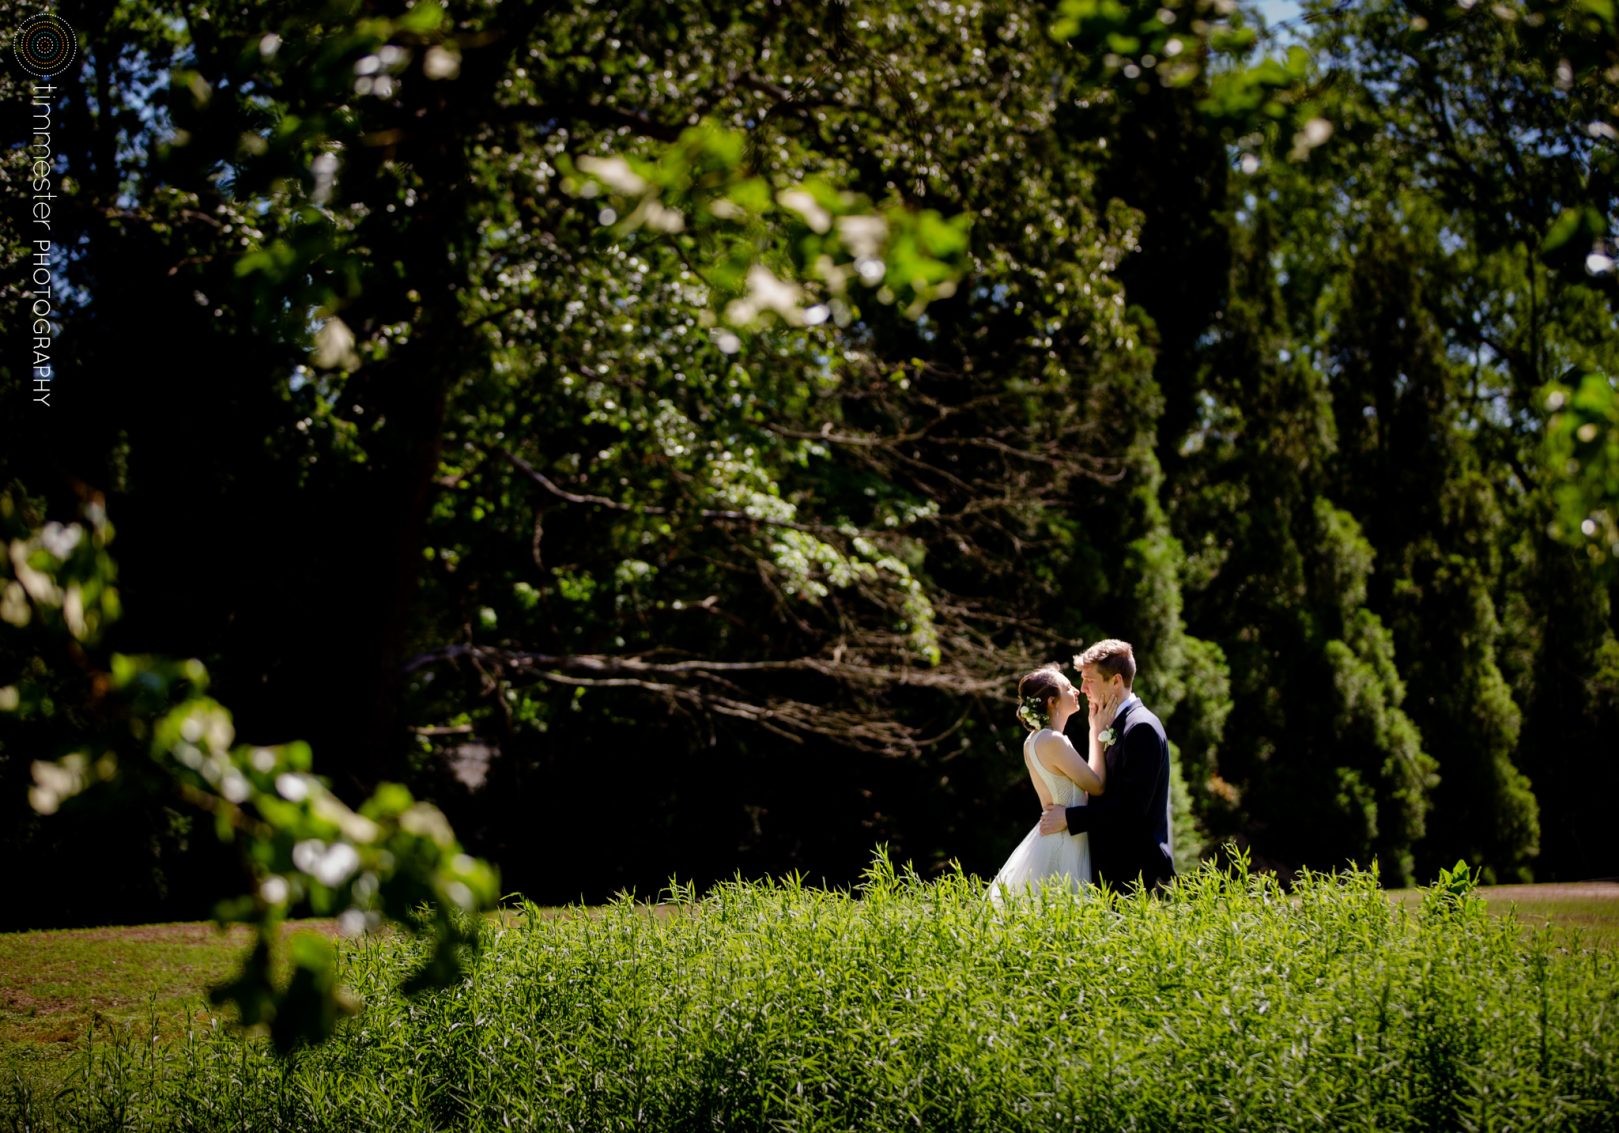 Portraits of bride & groom Sarah & Jacob for their outdoor garden ceremony at Fred Fletcher Park in Raleigh.